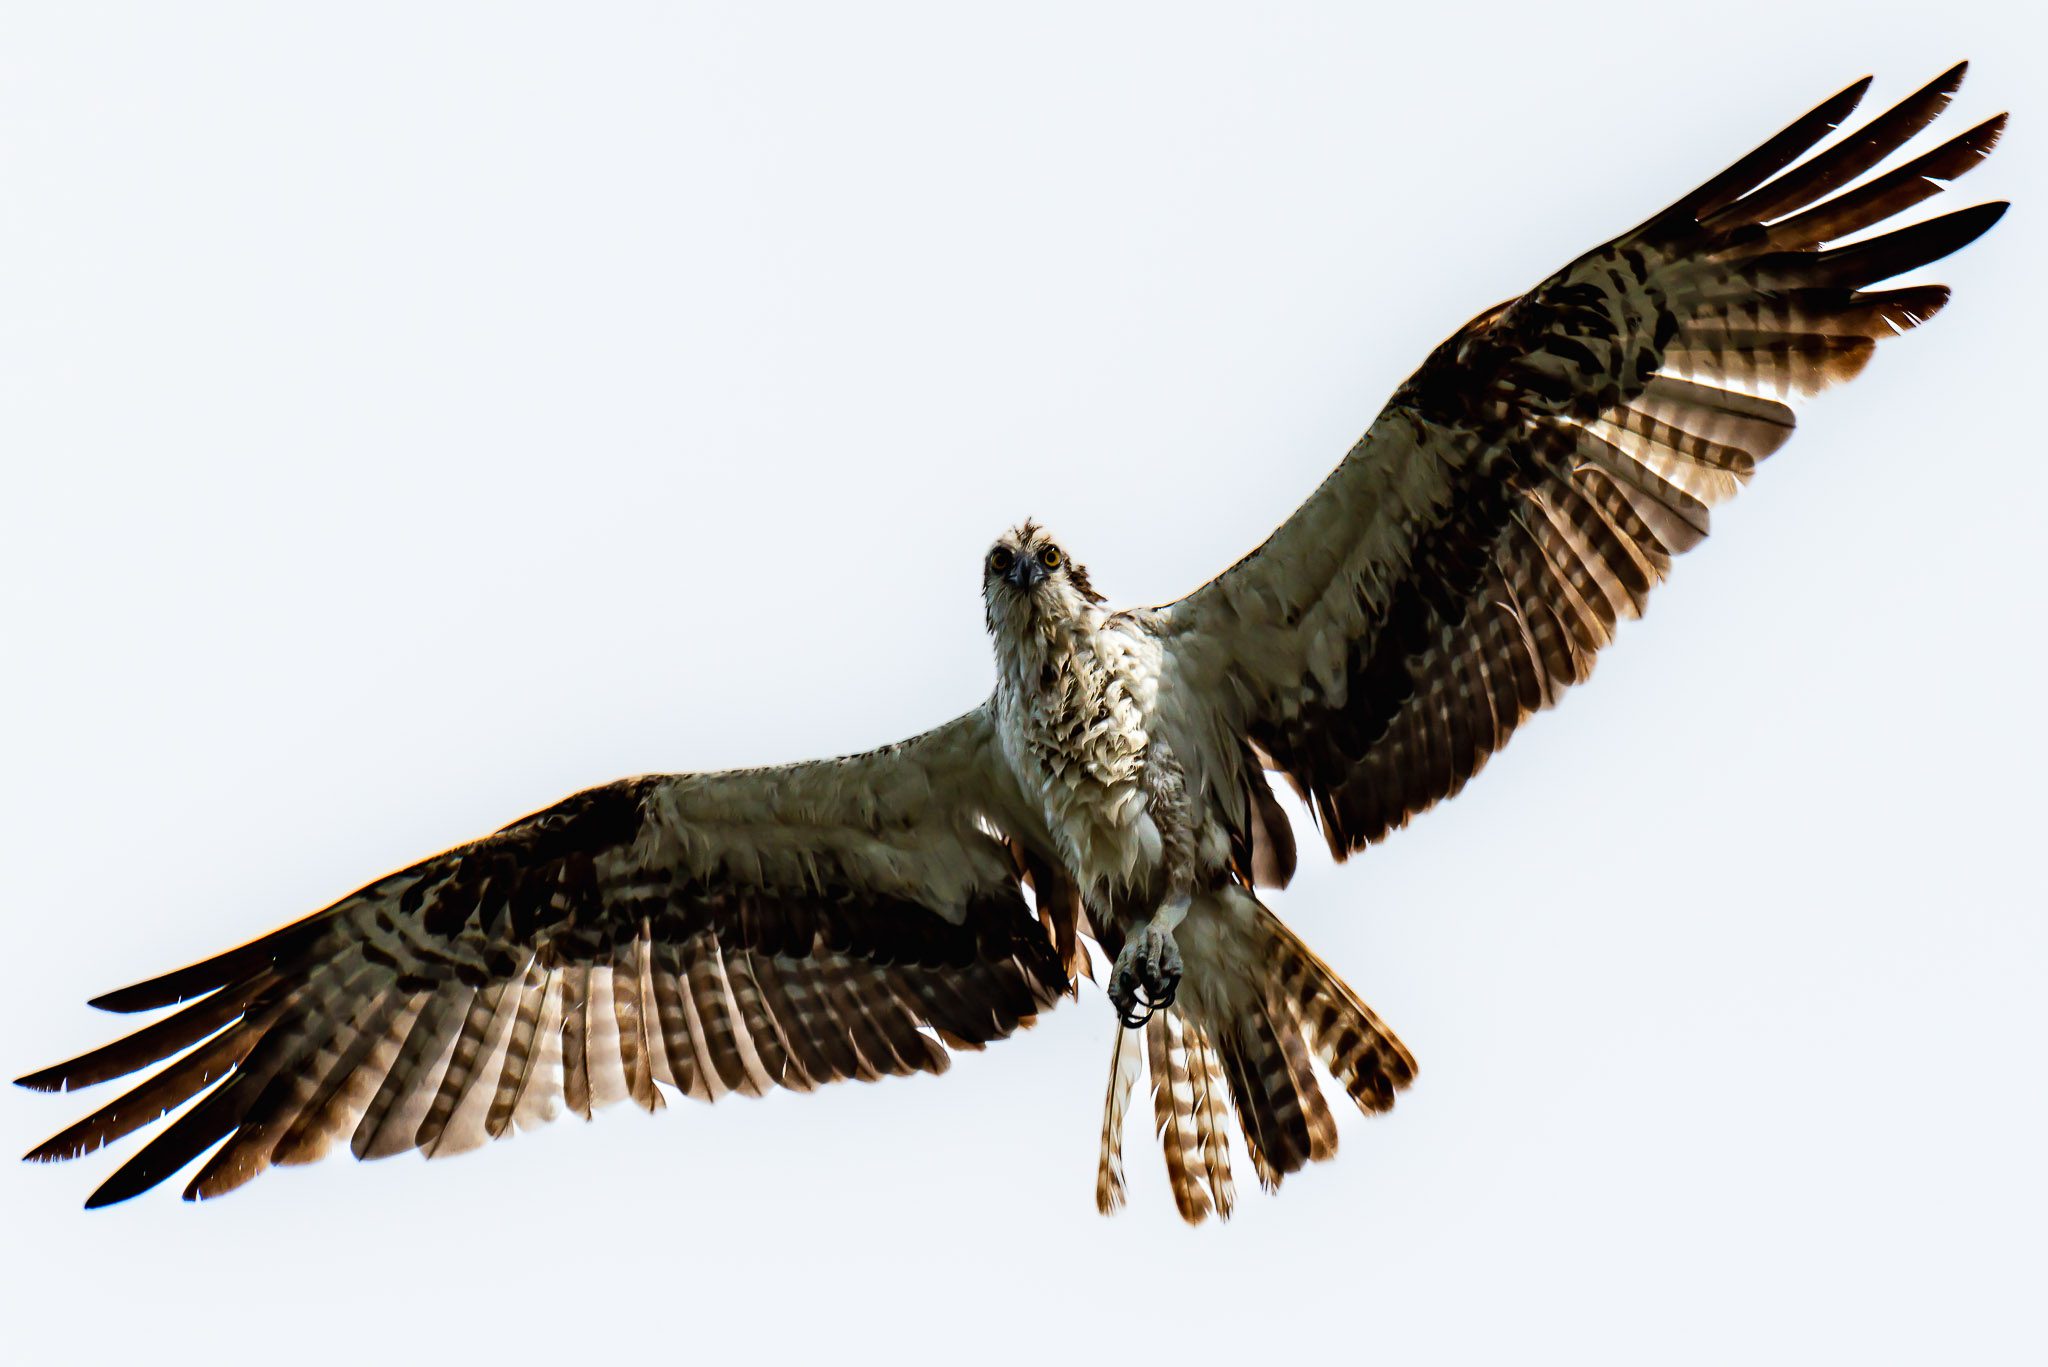 Osprey soaring over Canaveral National Seashore. These raptors, also known as birds of prey, have sharp barbed talons, curved beaks, and large powerful wings.